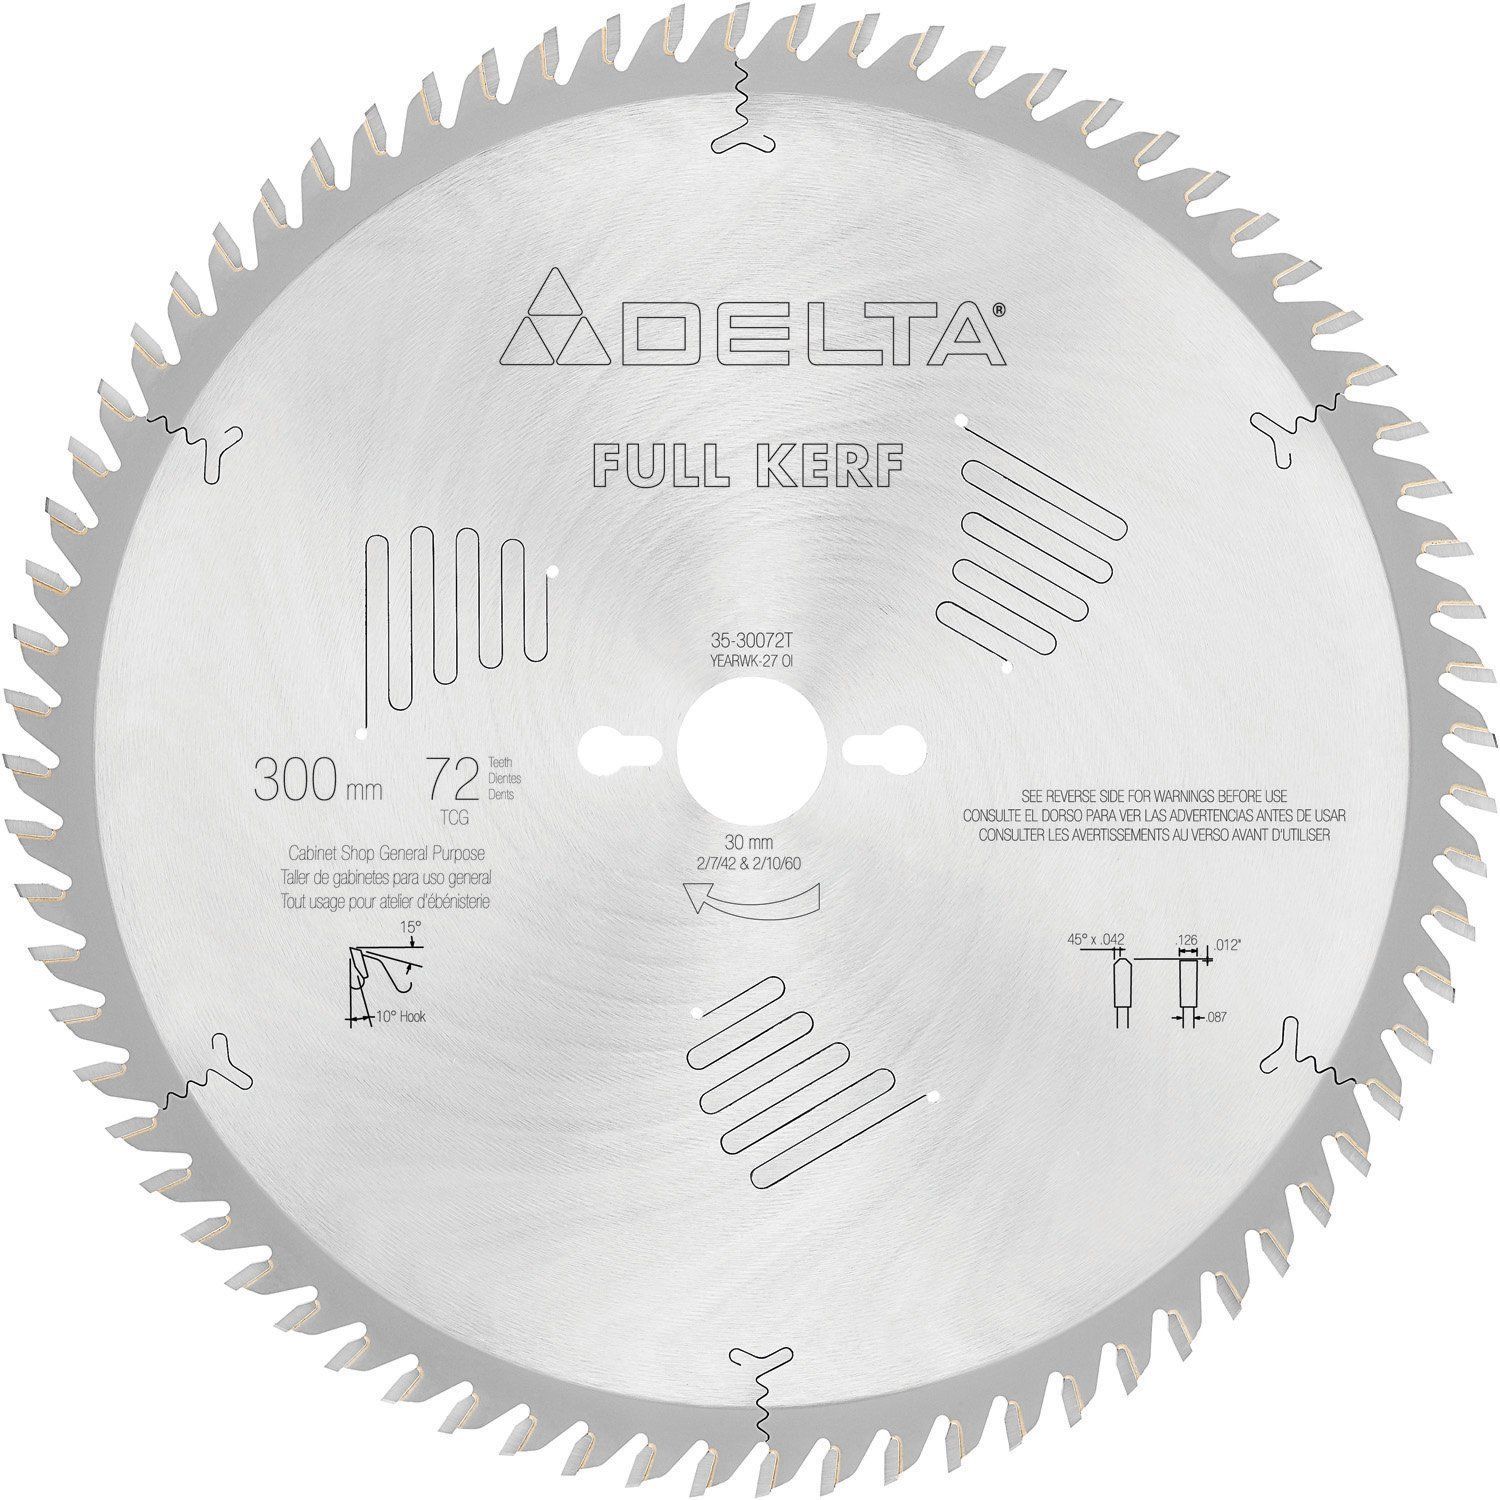 Delta 35-30072T Full Kerf Triple Chip Saw Blade 300MM x 72 Tooth USA